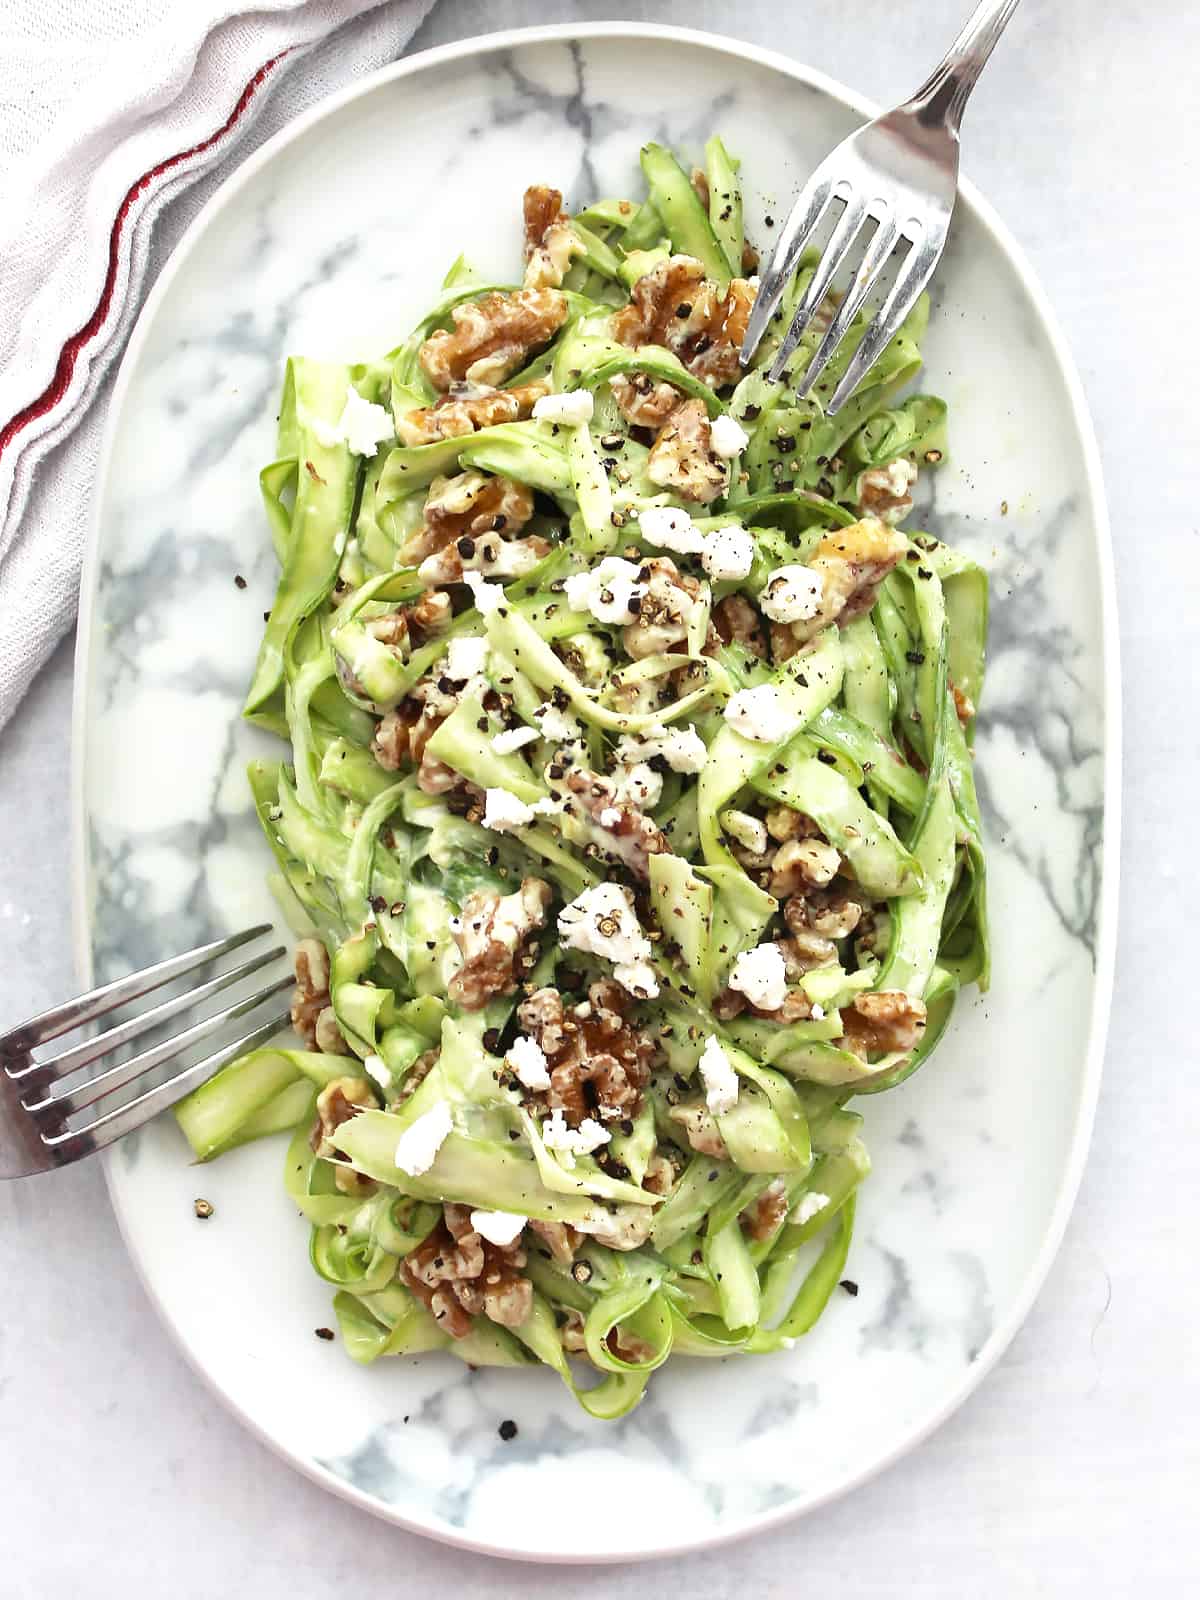 Shaved Asparagus Salad (Asparagus, Goat Cheese and Walnuts)